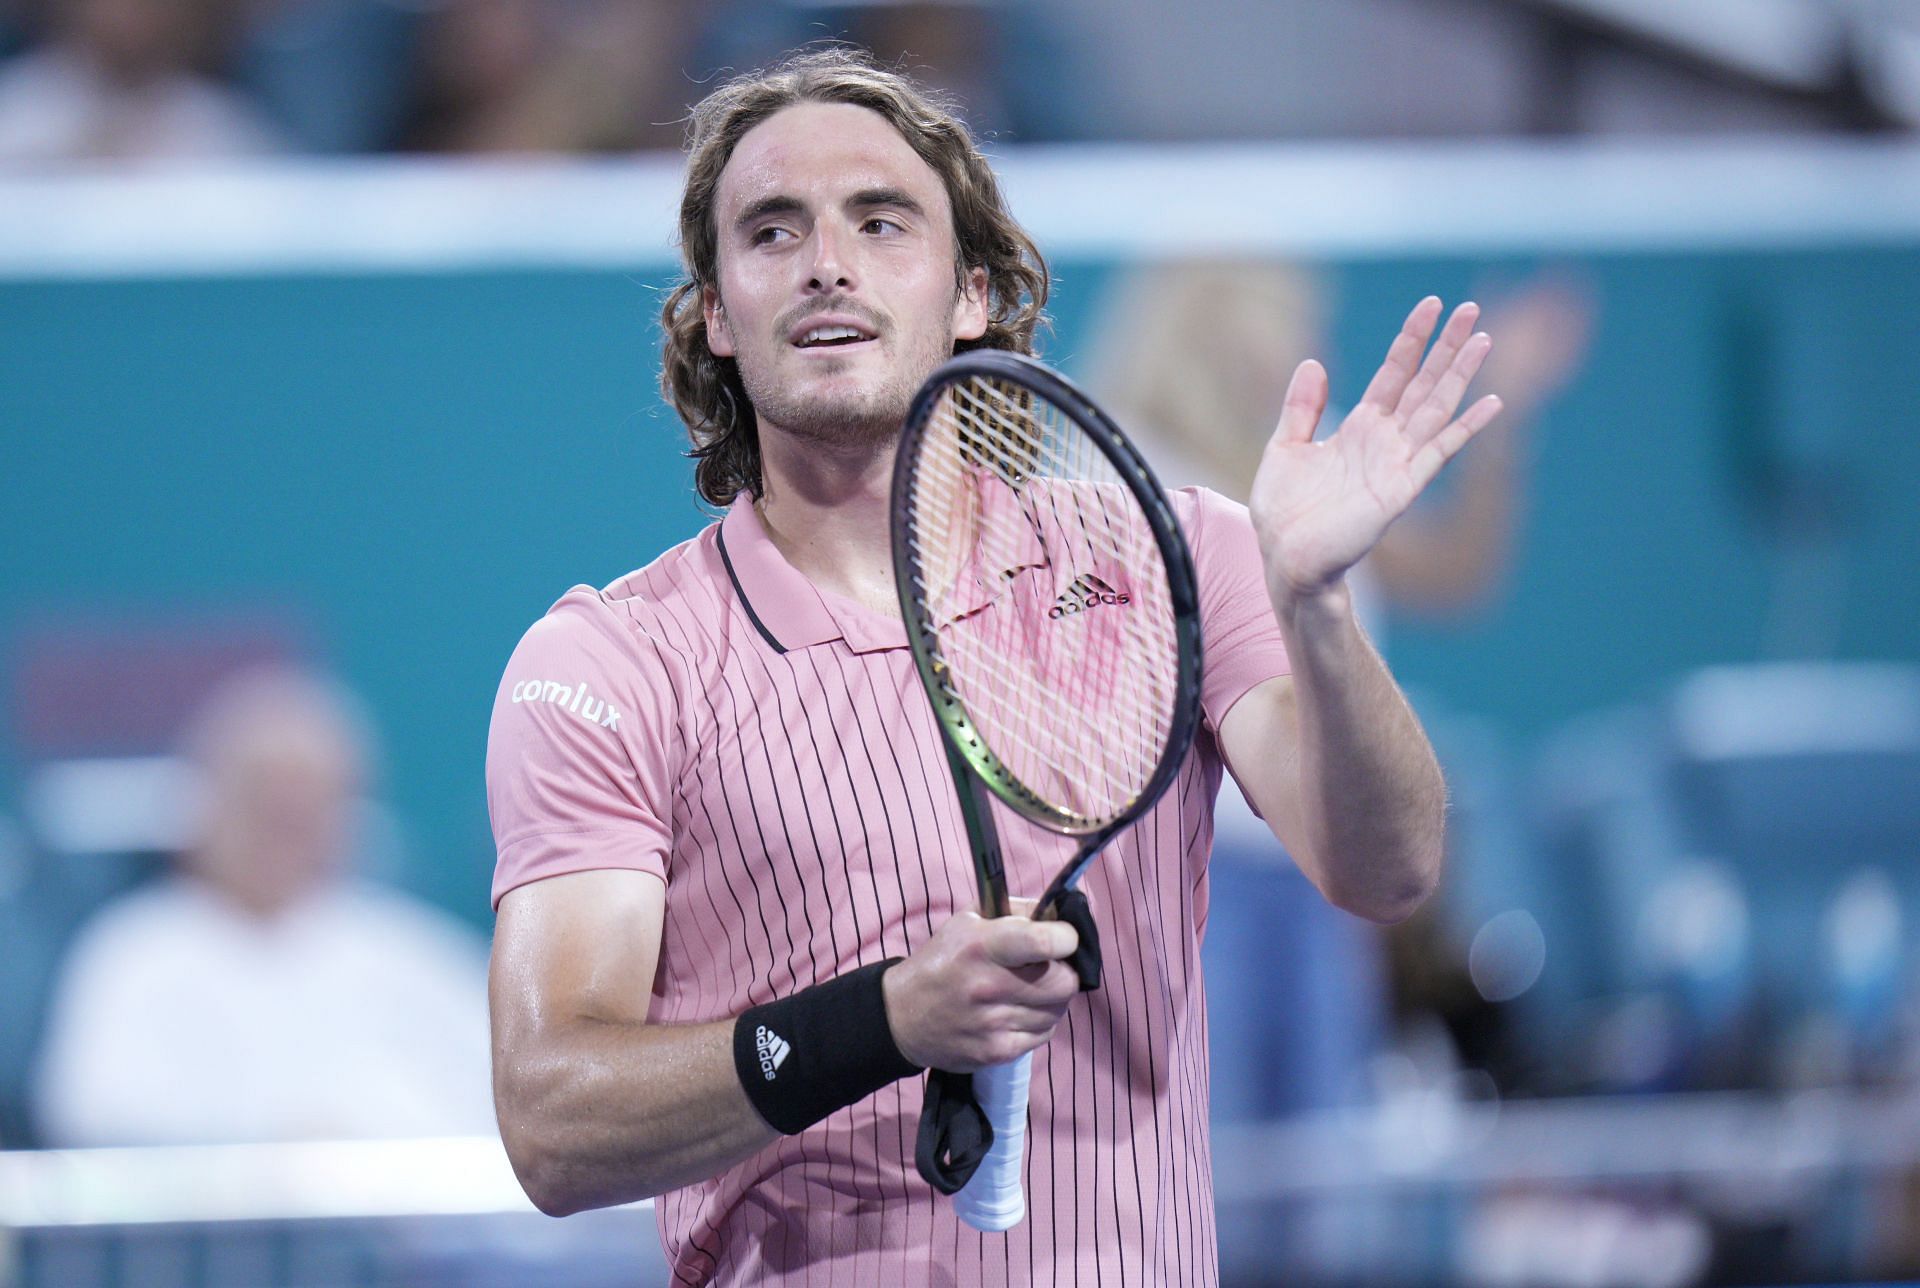 Stefanos Tsitsipas has won 15 out of 21 matches this year so far